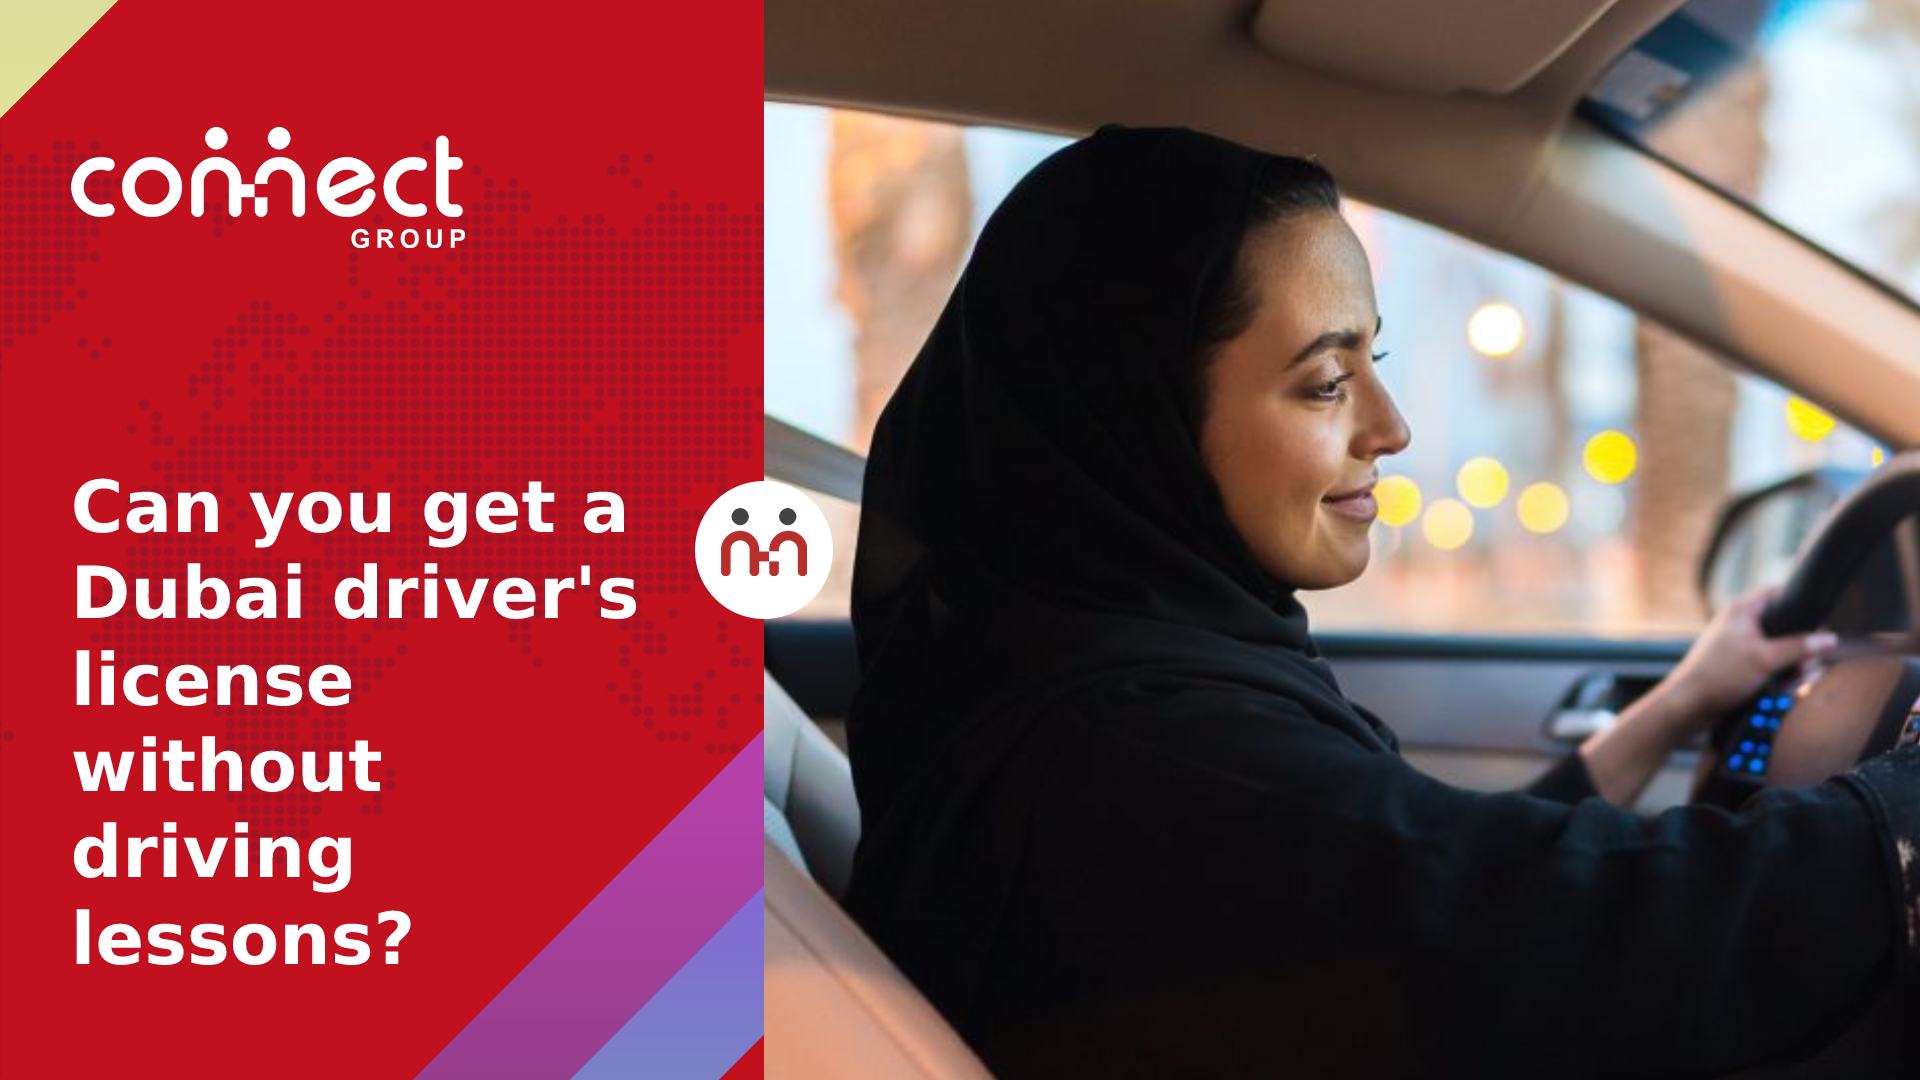 Can you get a Dubai driver’s license without driving lessons?